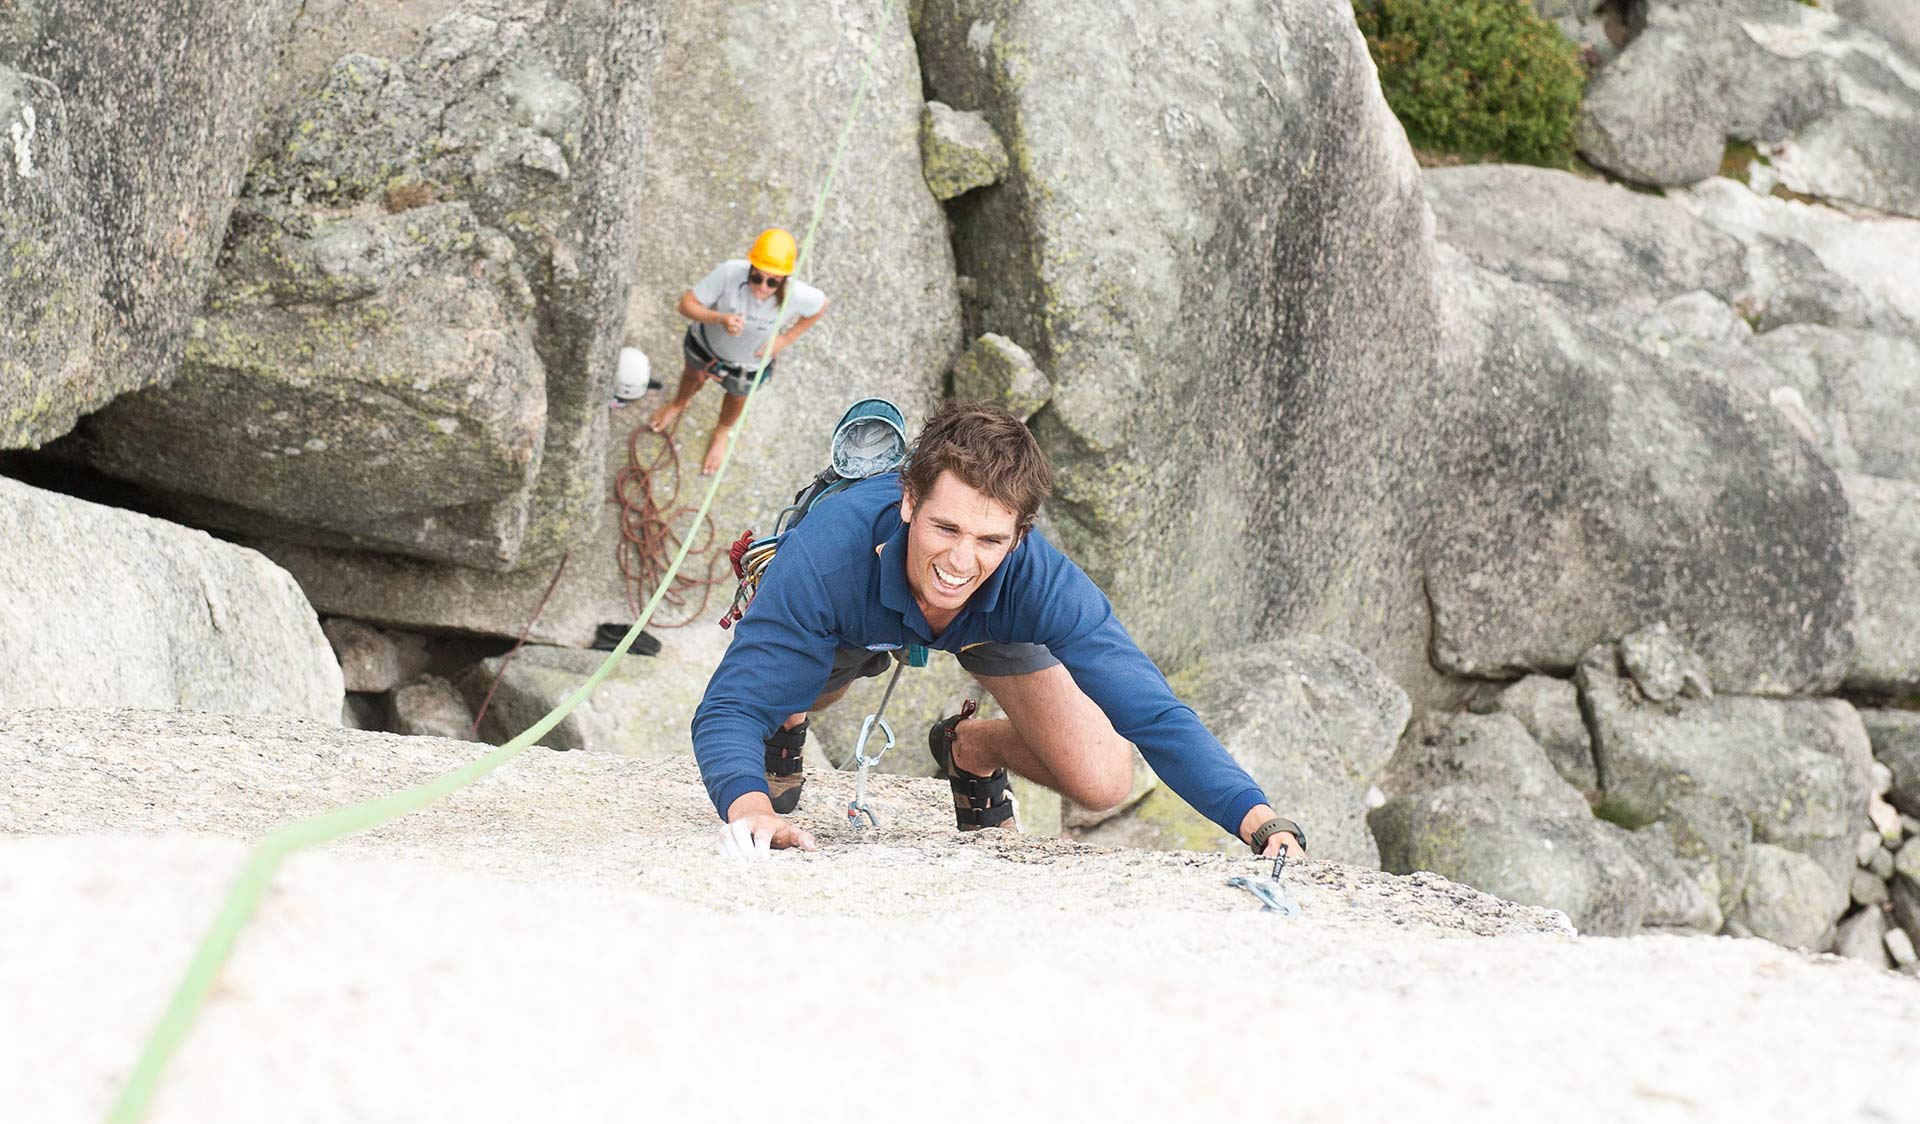 A young man climbs a near featureless wall at Mt Buffalo while his climbing partner watches on.